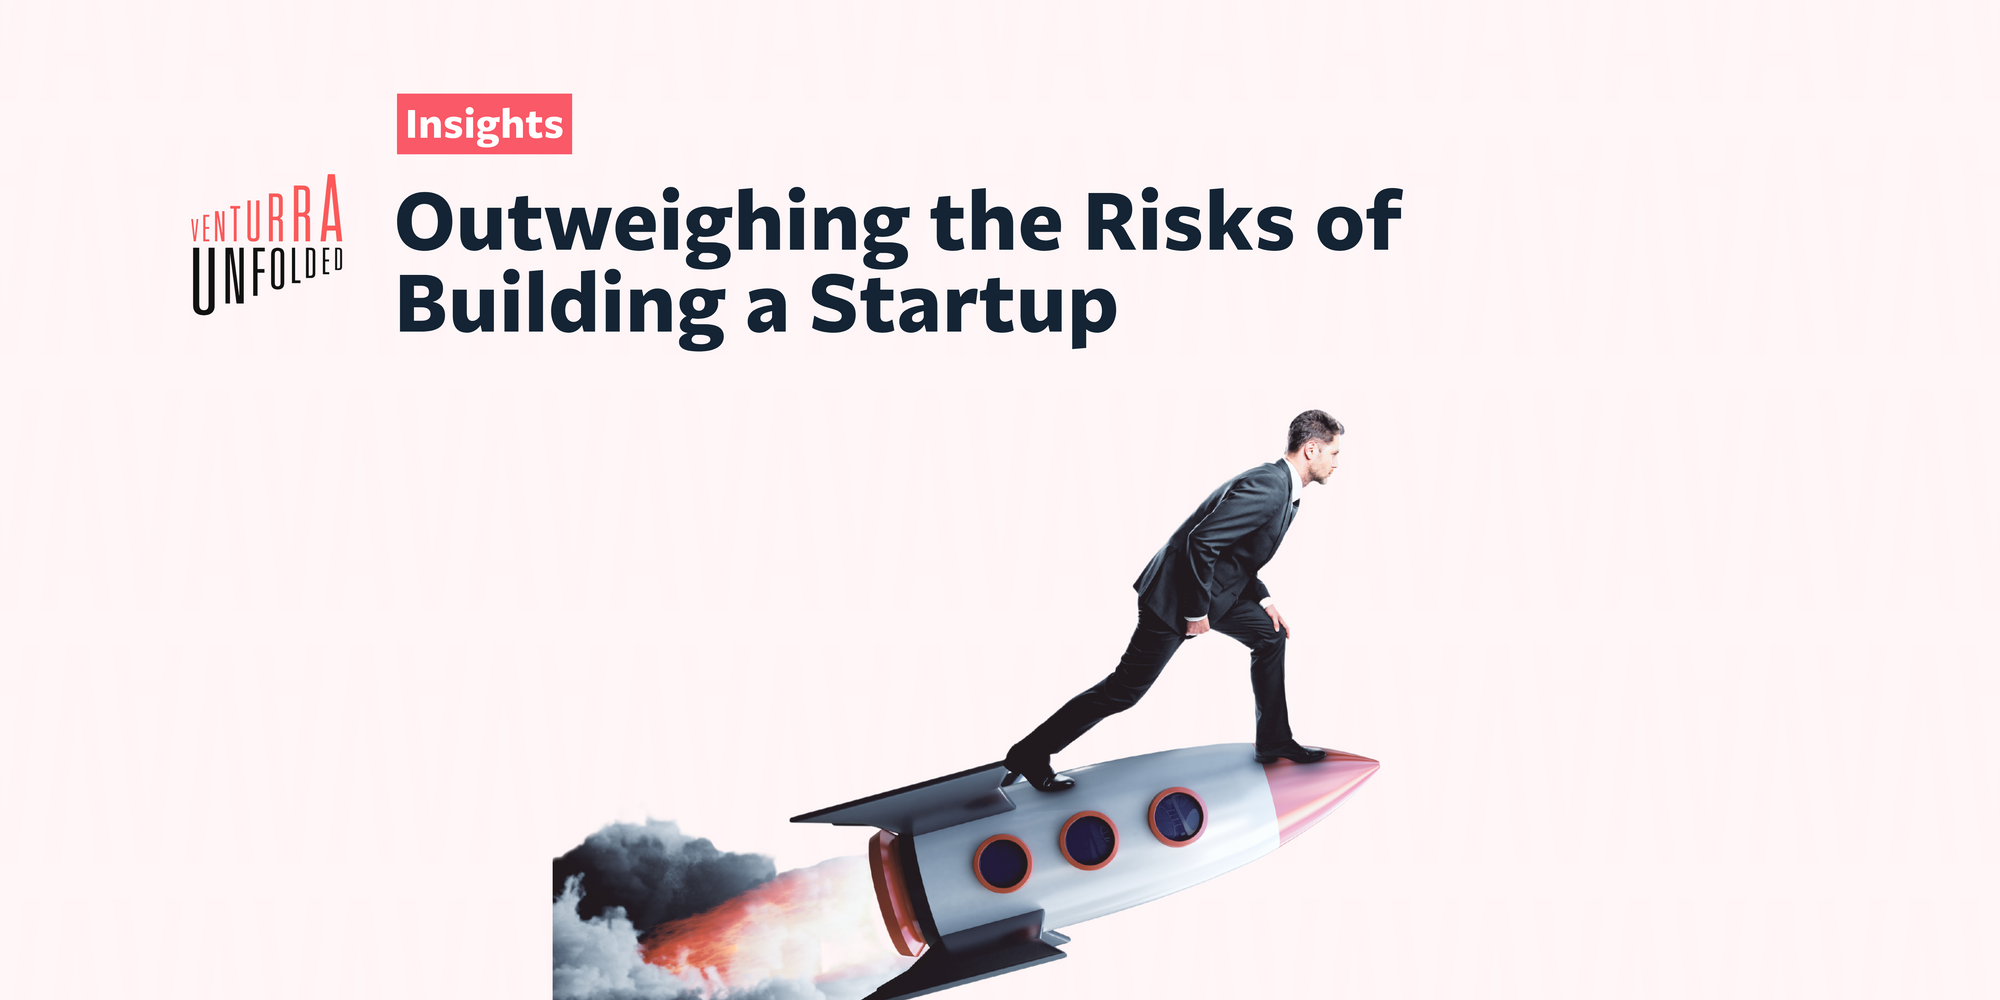 Outweighing the Risks of Building a Startup